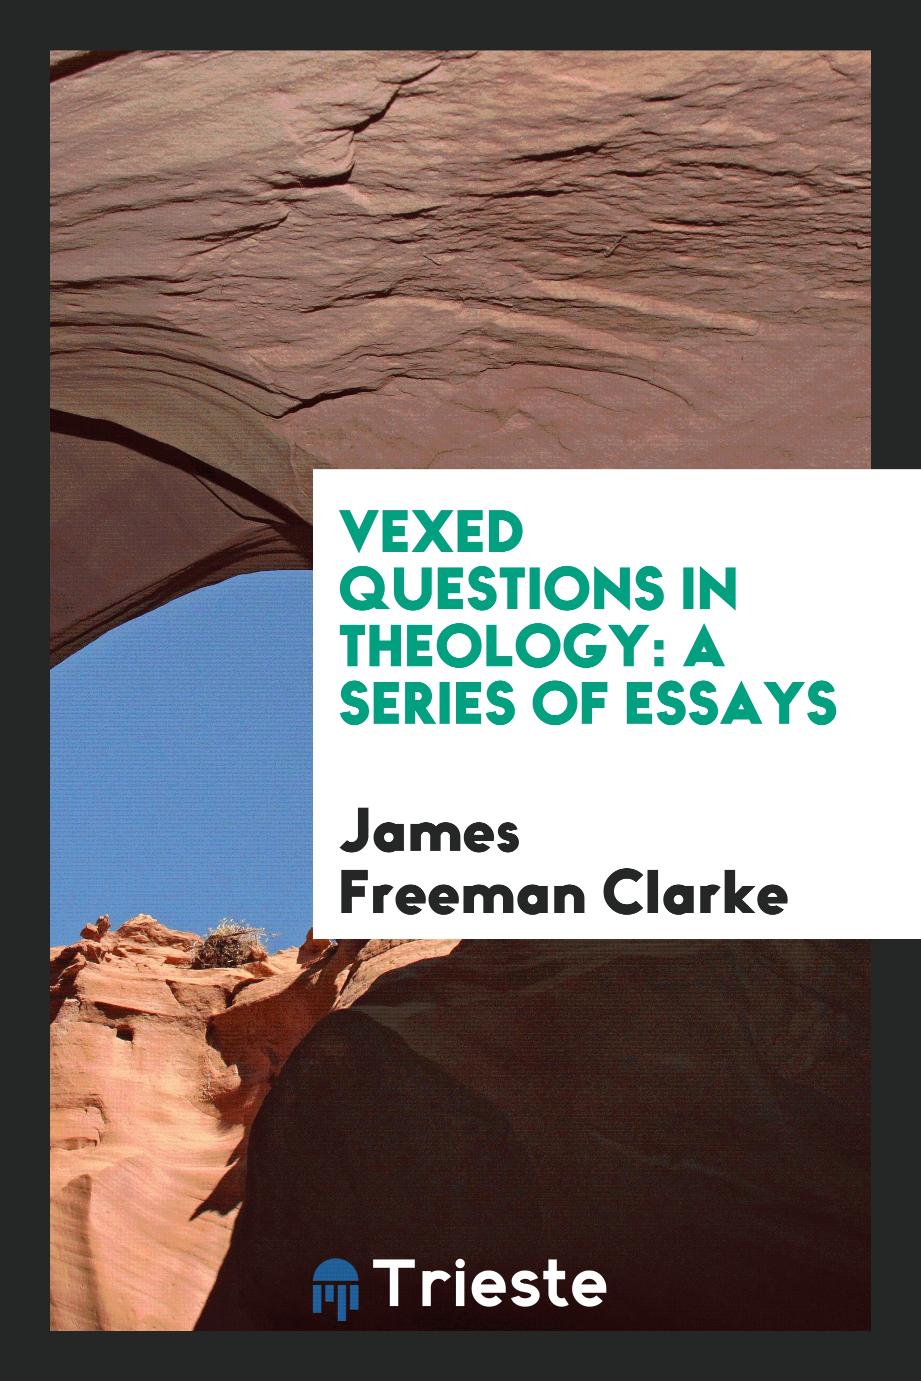 Vexed Questions in Theology: A Series of Essays